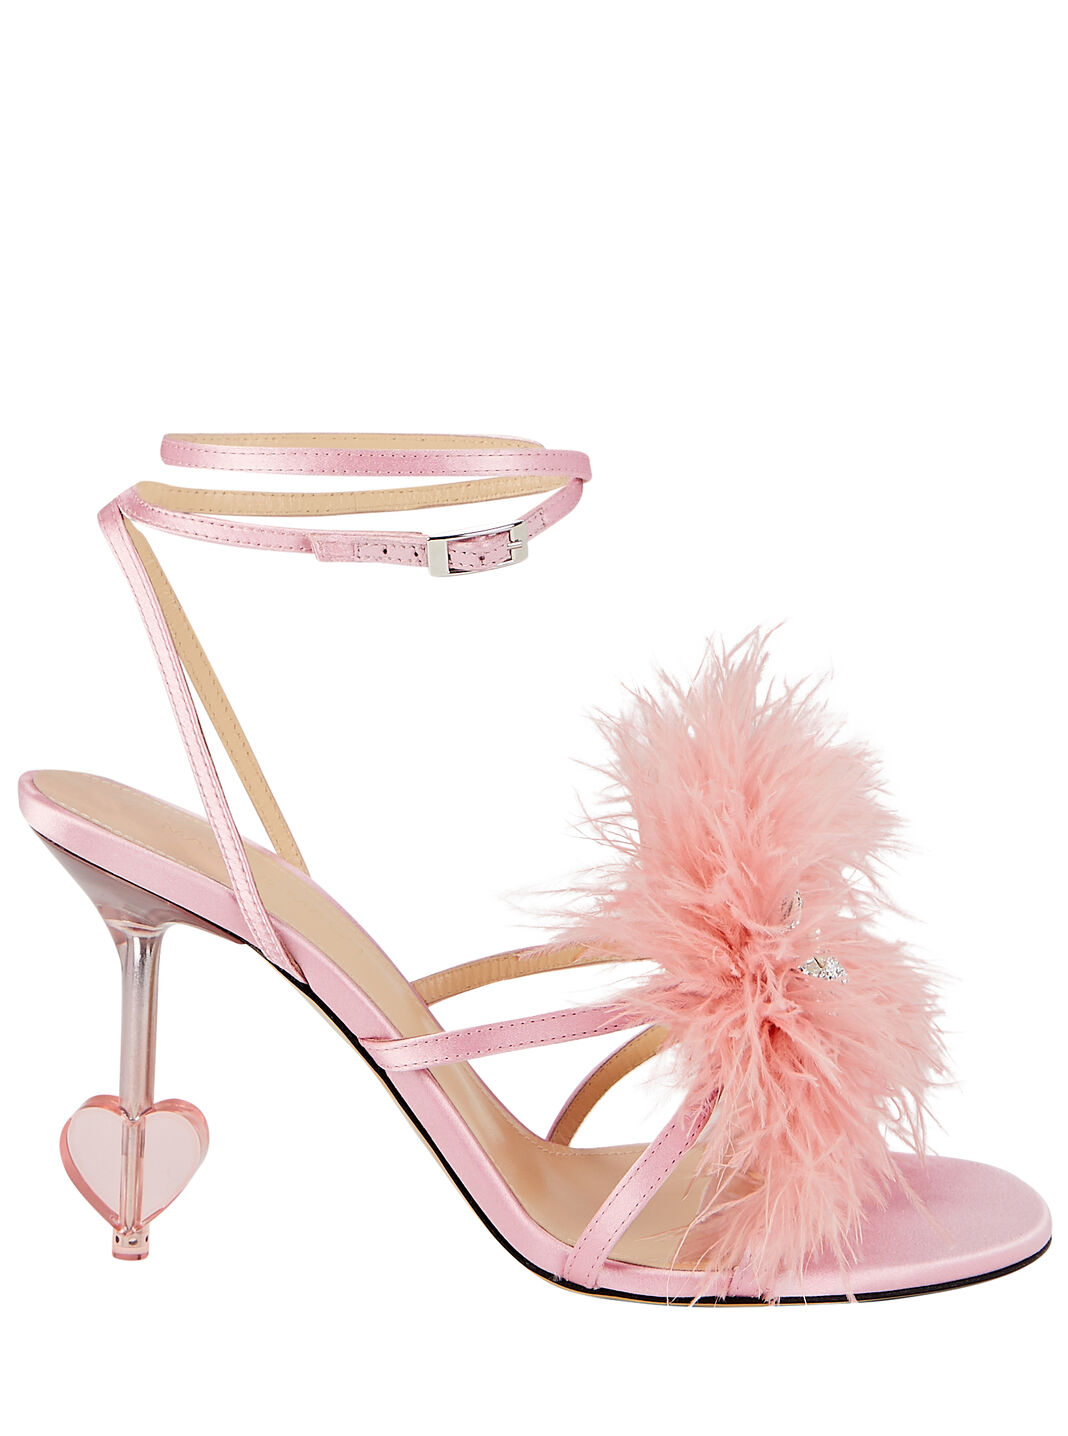 Feather-Trimmed Satin Sandals